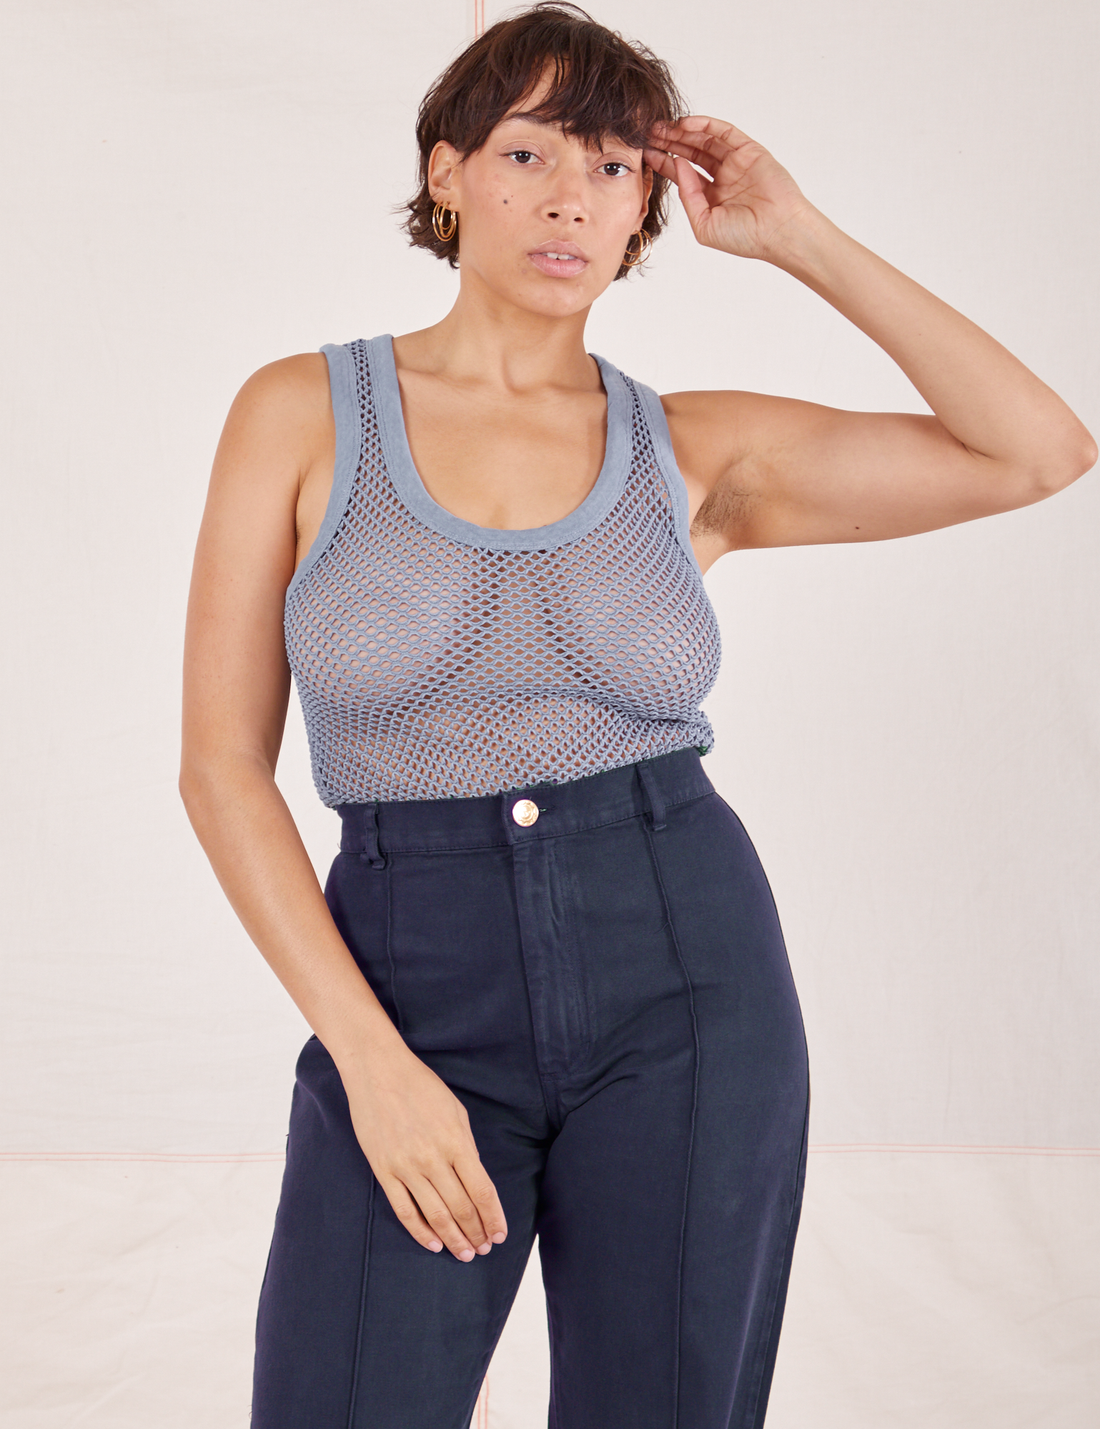 Tiara is 5'4" and wearing XS Mesh Tank Top in Periwinkle paired with navy Western Pants